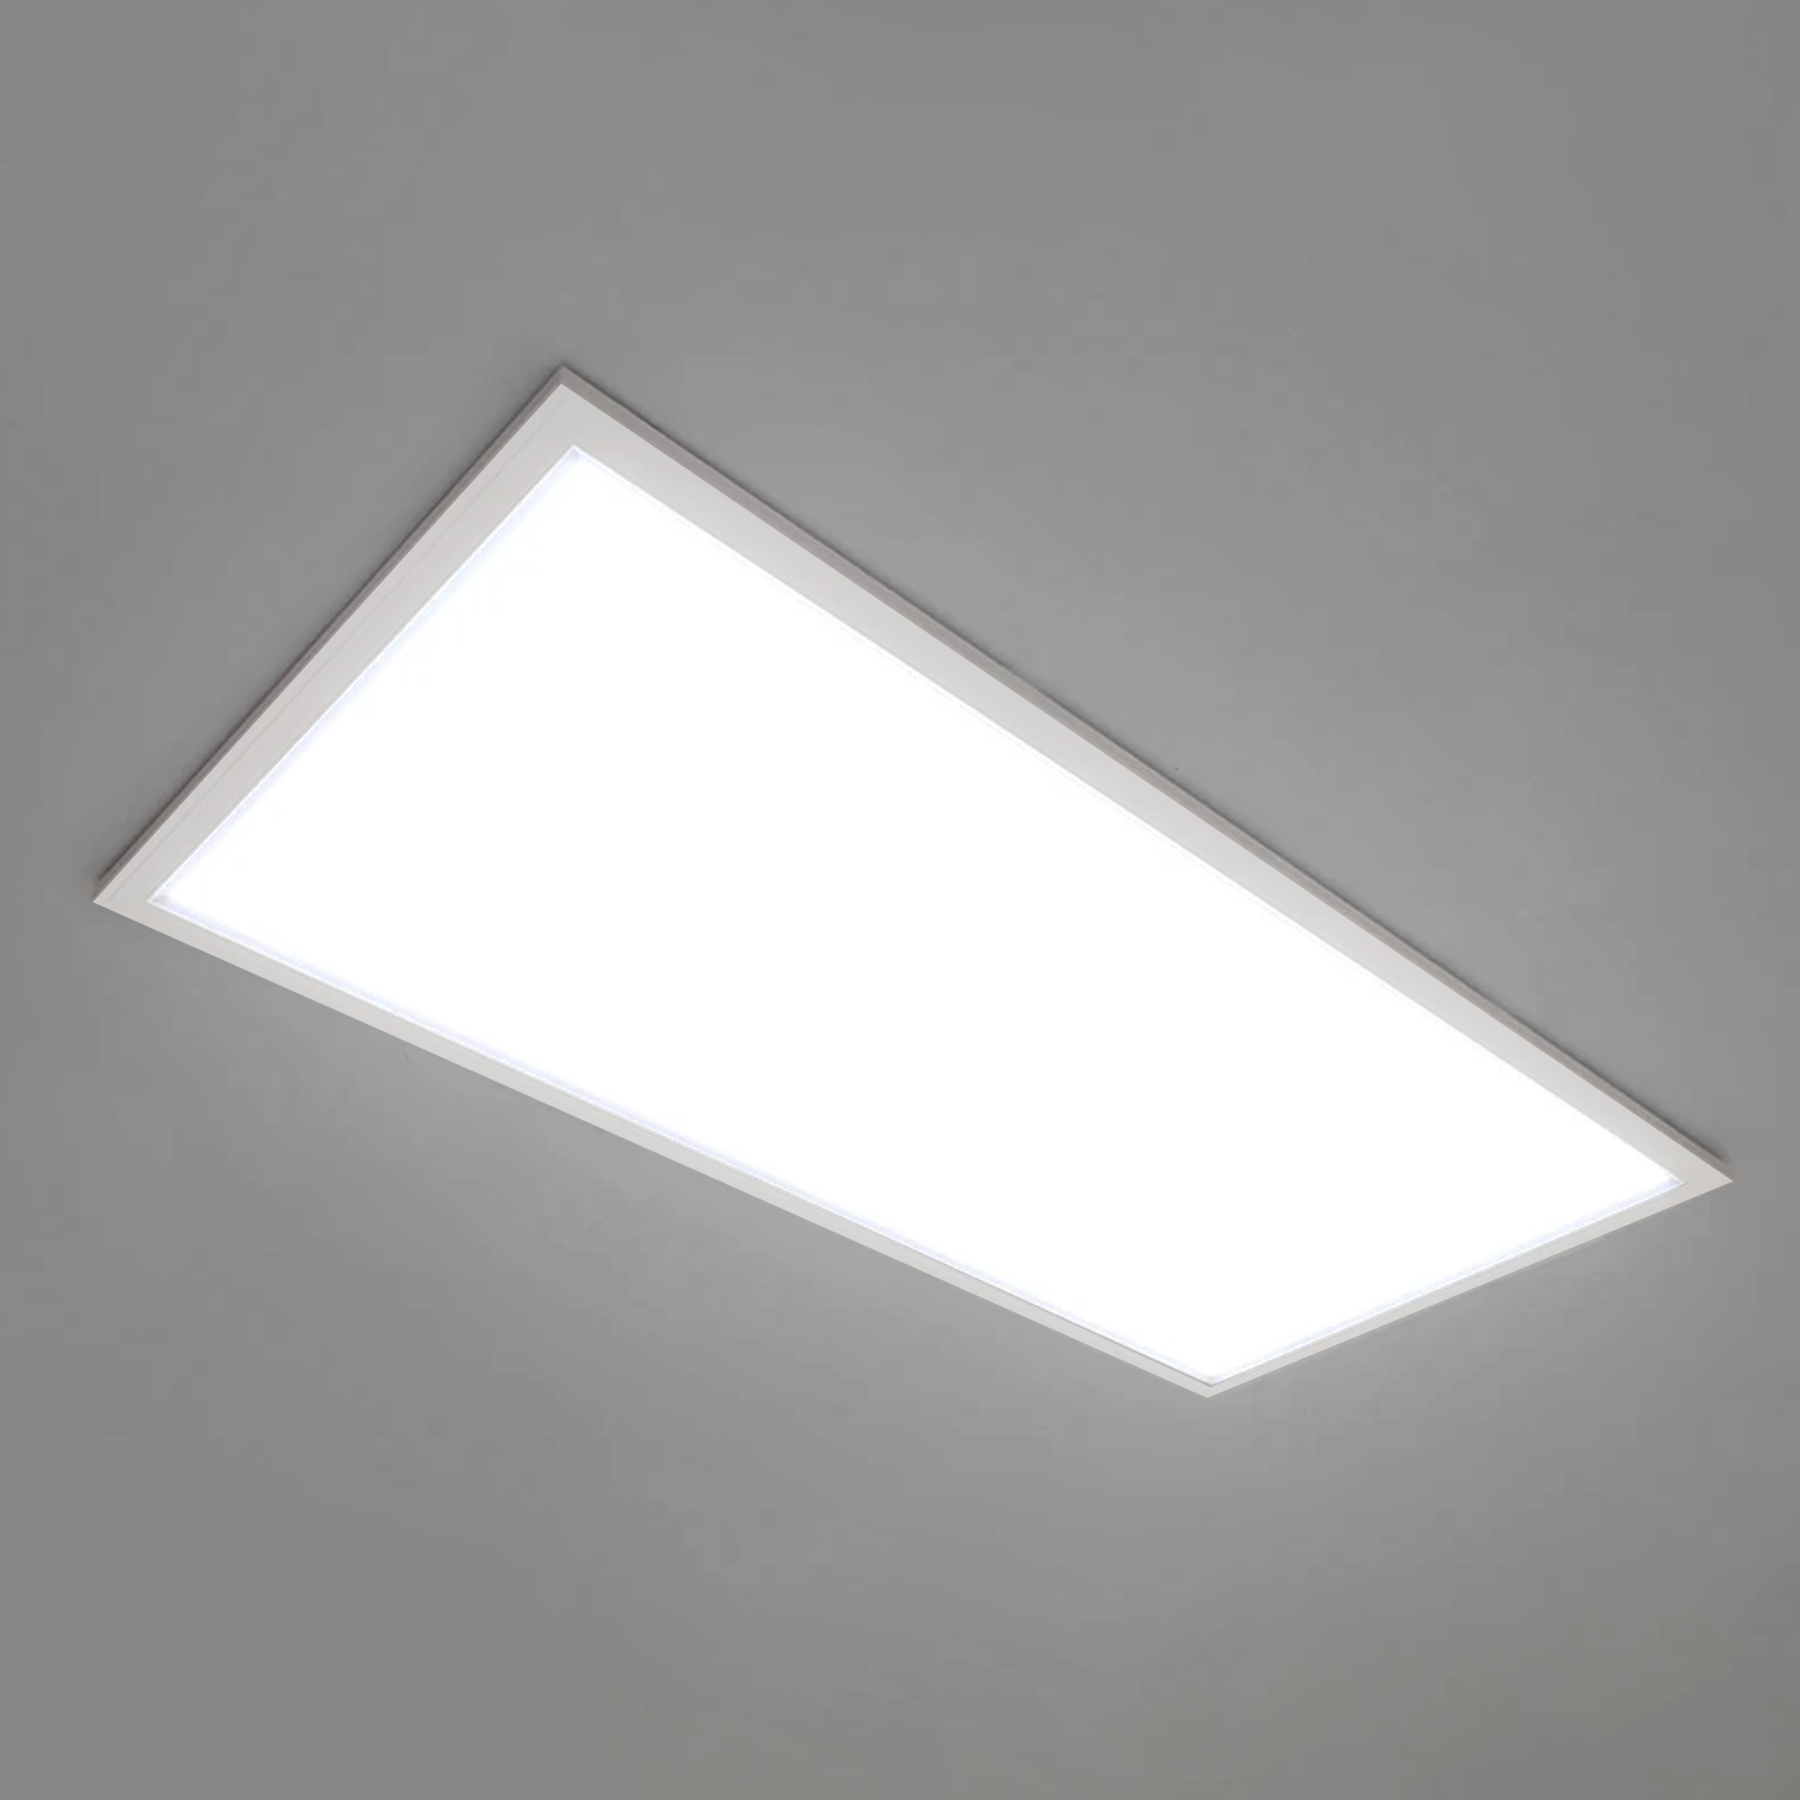 neon ceiling light, neon ceiling light Suppliers and Manufacturers